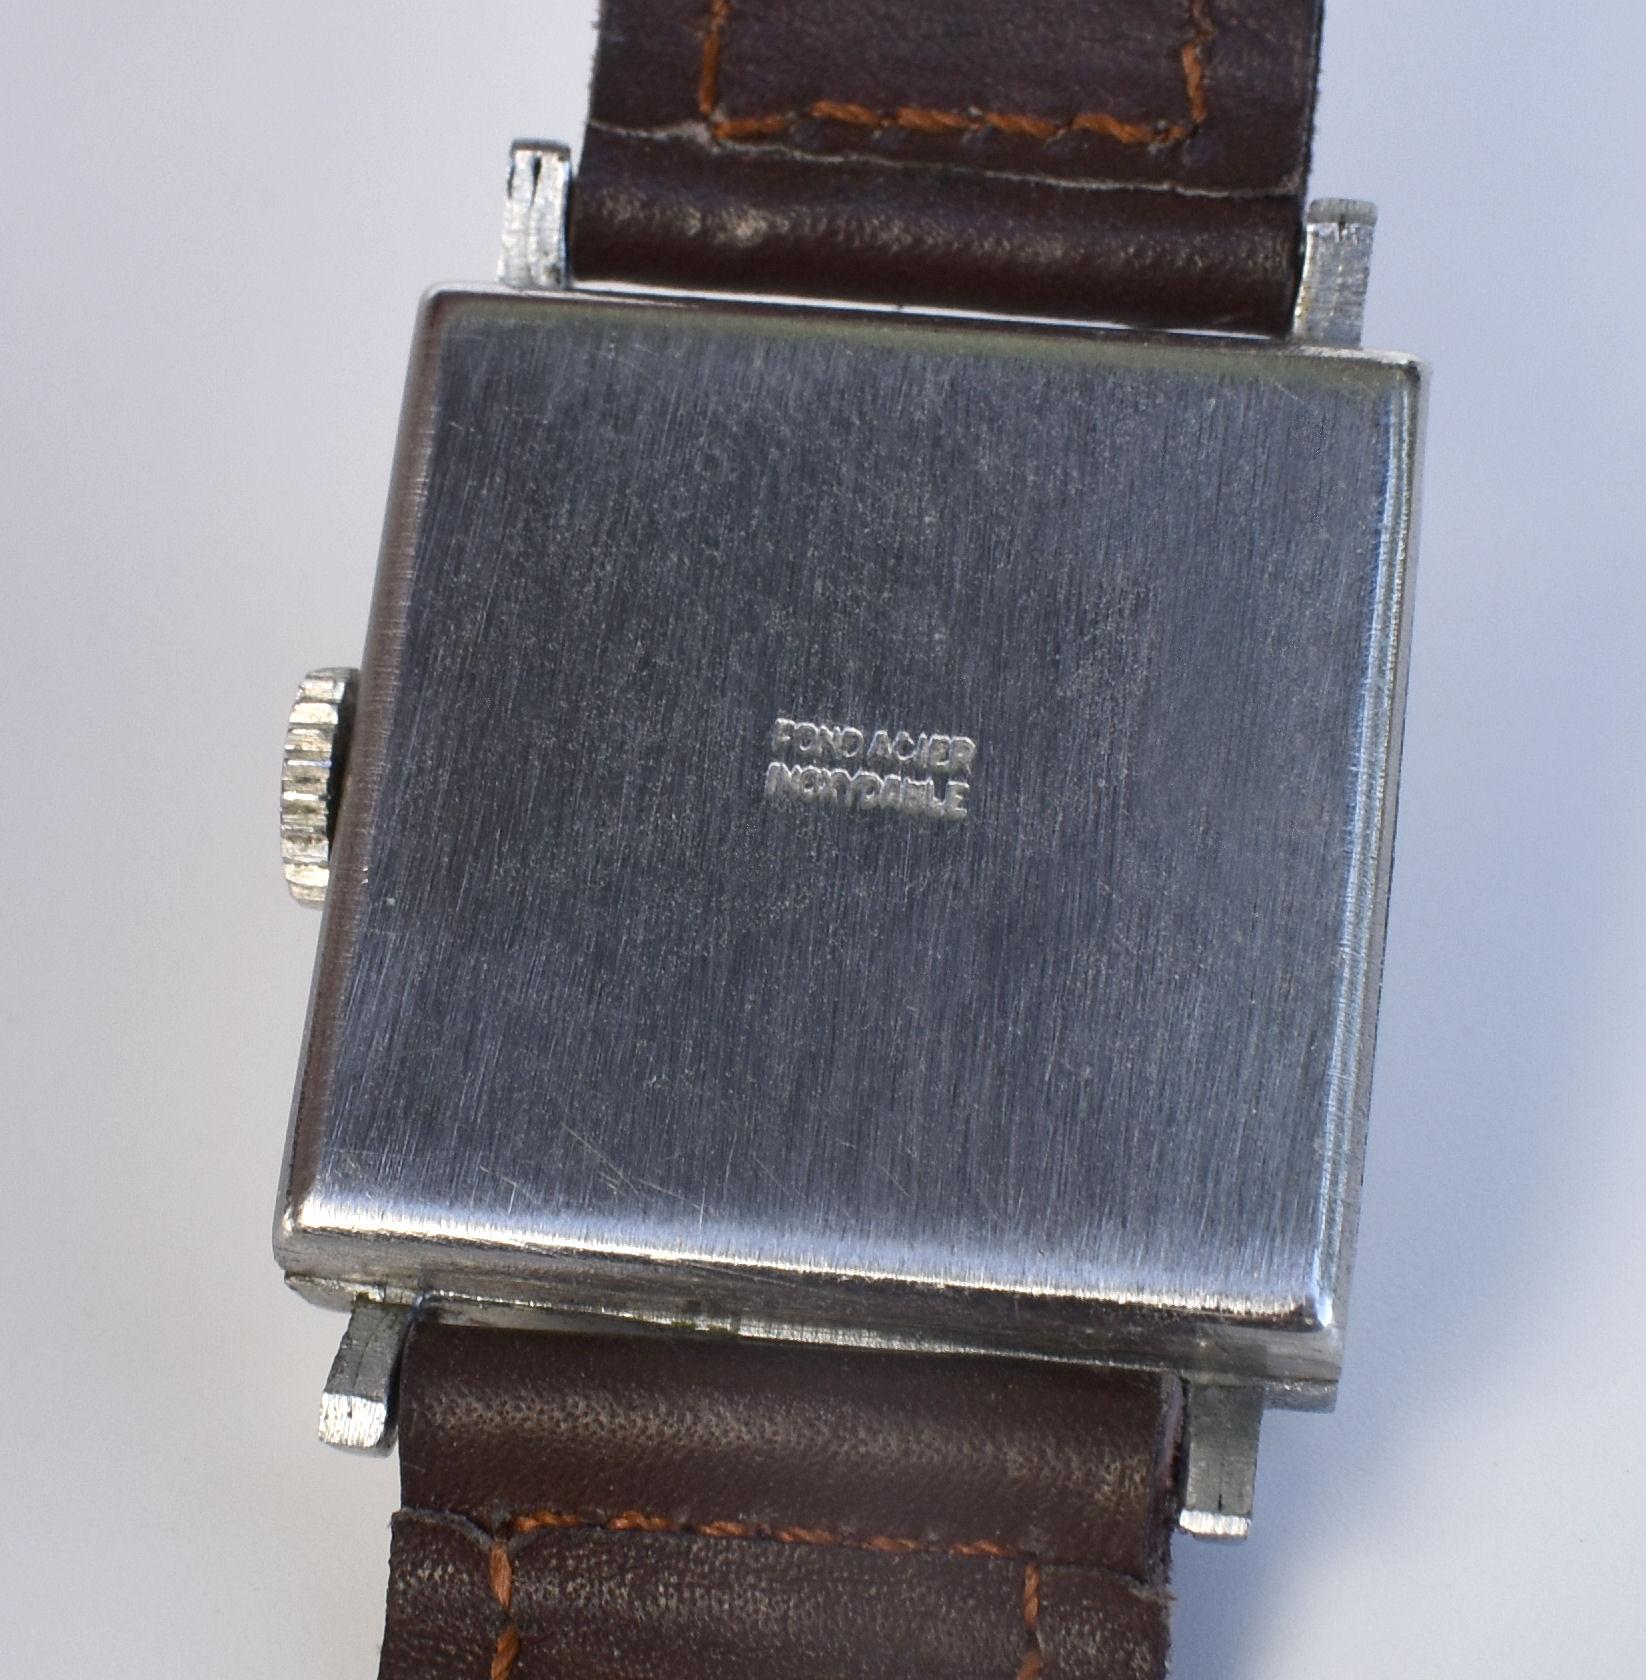 Art Deco Gents Manual Wristwatch by French Watchmakers Judex, c1930 1